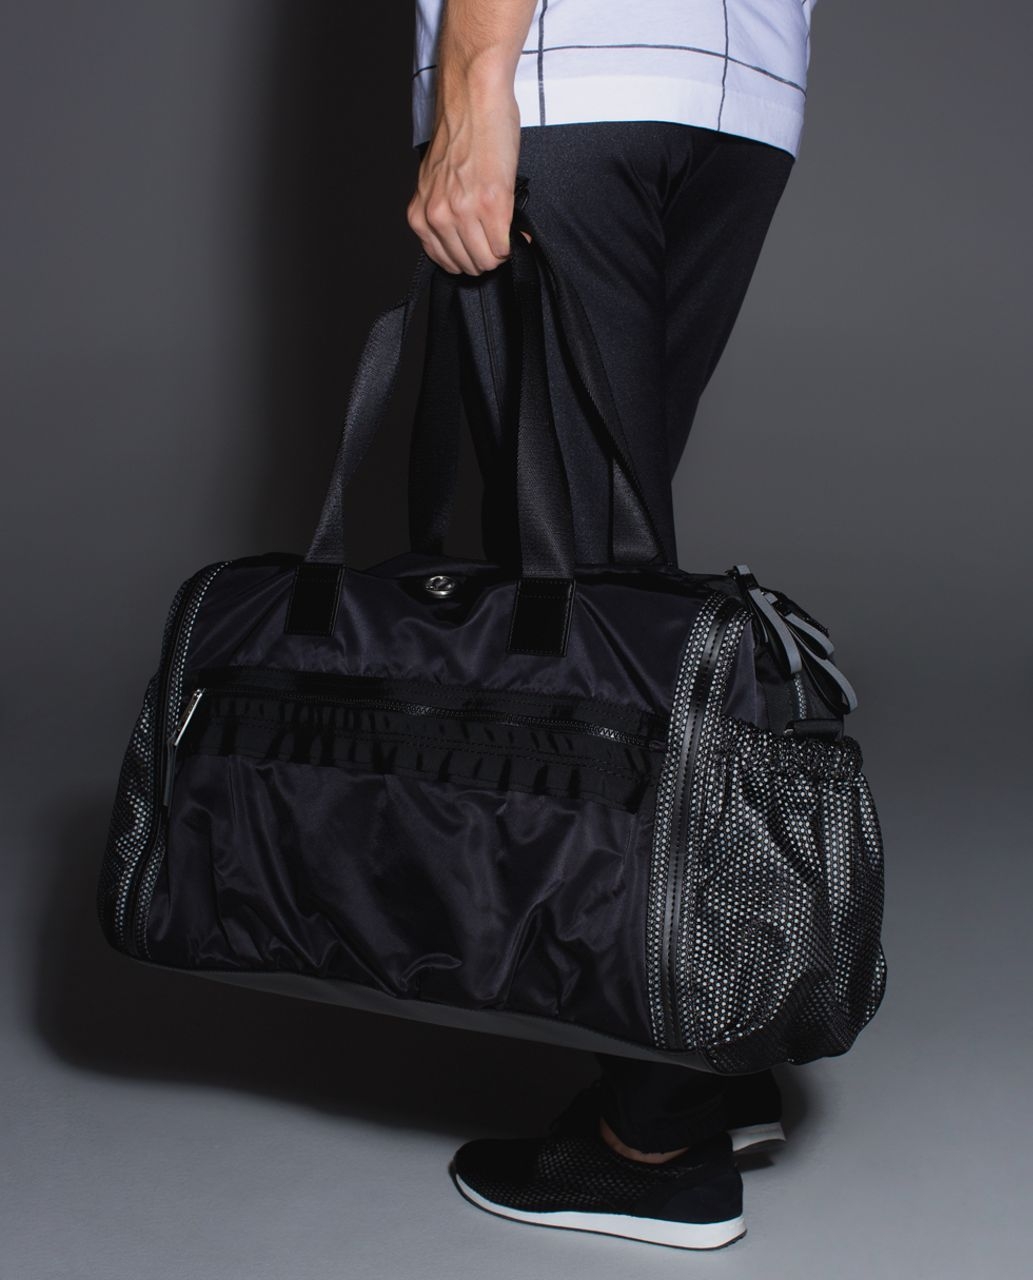 Sports bag with laptop compartment